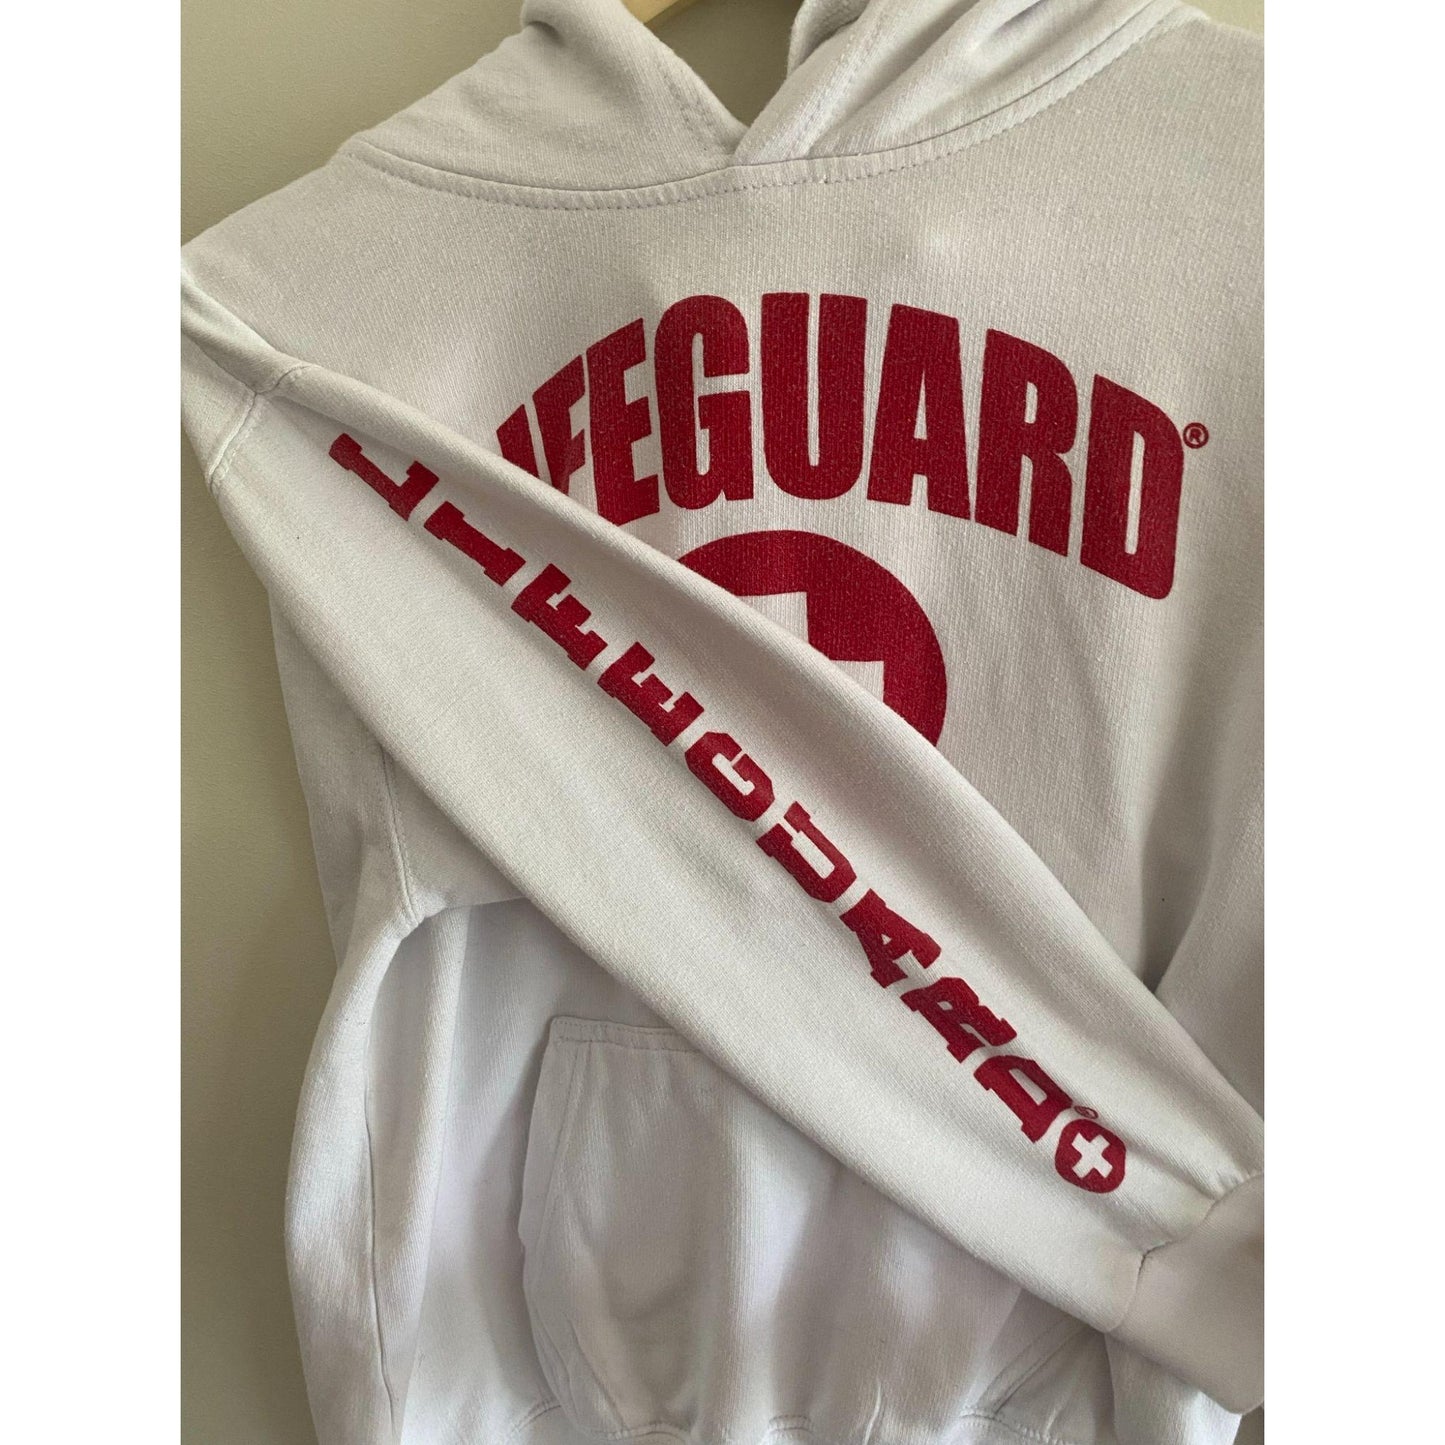 Men's White Red Key West Red Cross Lifeguard +  Hoodie  S